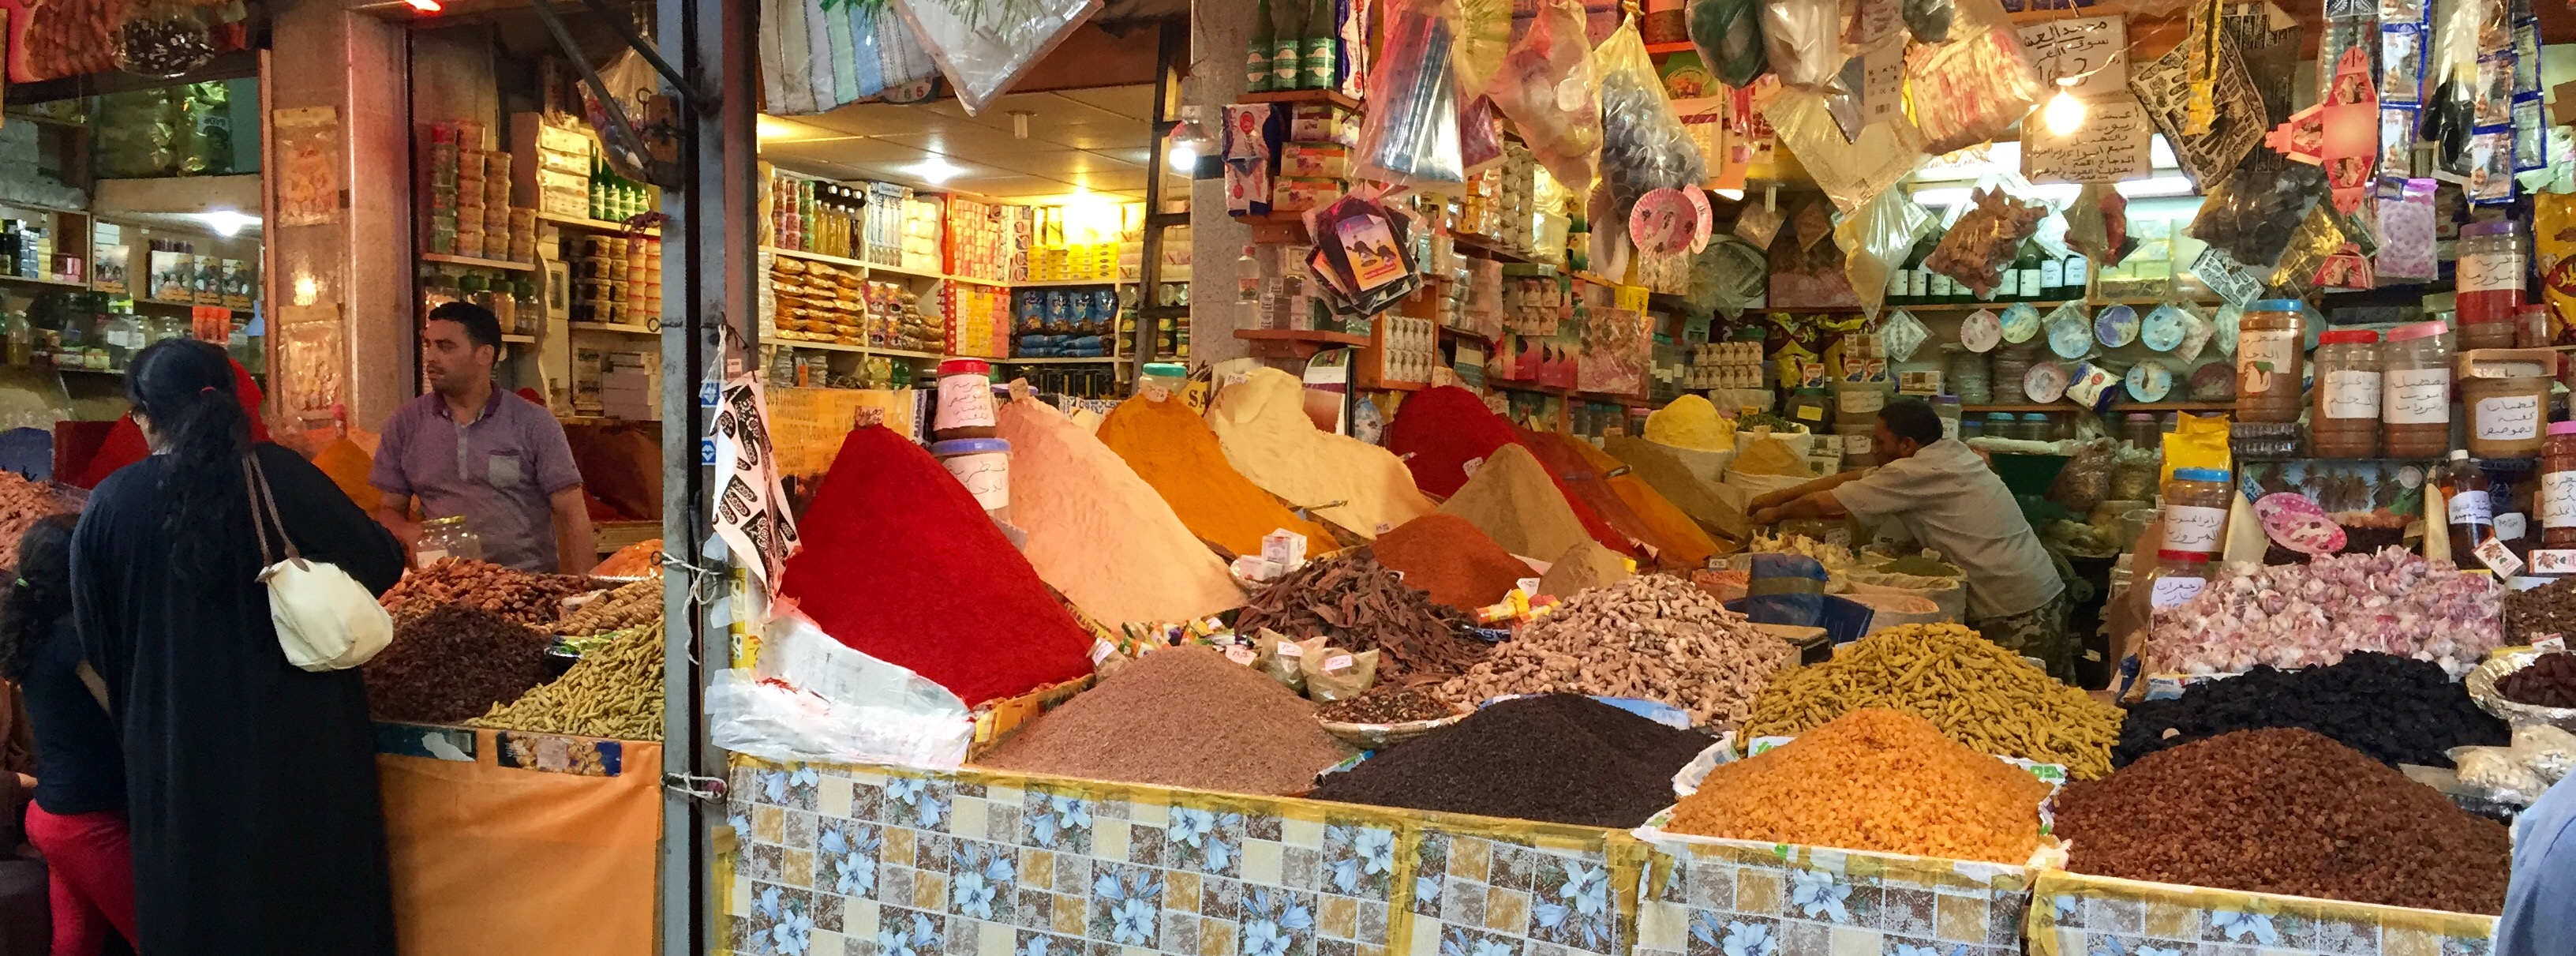 Don't look for familiar food, enjoy what the world has to offer! Spice tasting in the Casablanca medina was something I'll never forget.